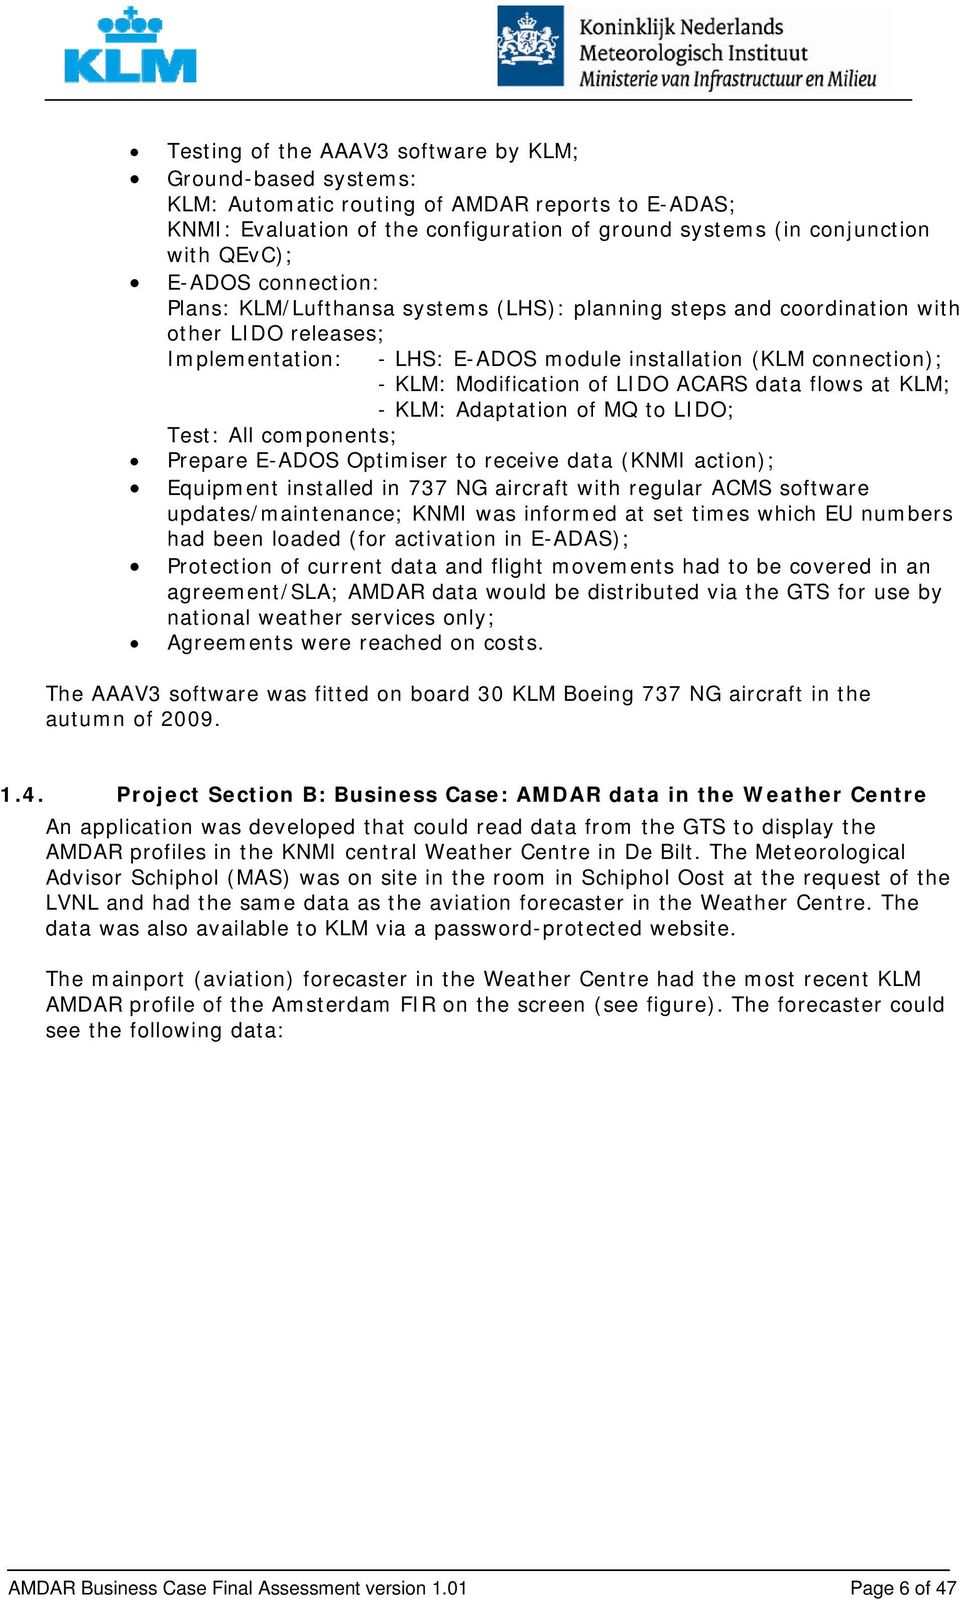 Modification of LIDO ACARS data flows at KLM; - KLM: Adaptation of MQ to LIDO; Test: All components; Prepare E-ADOS Optimiser to receive data (KNMI action); Equipment installed in 737 NG aircraft